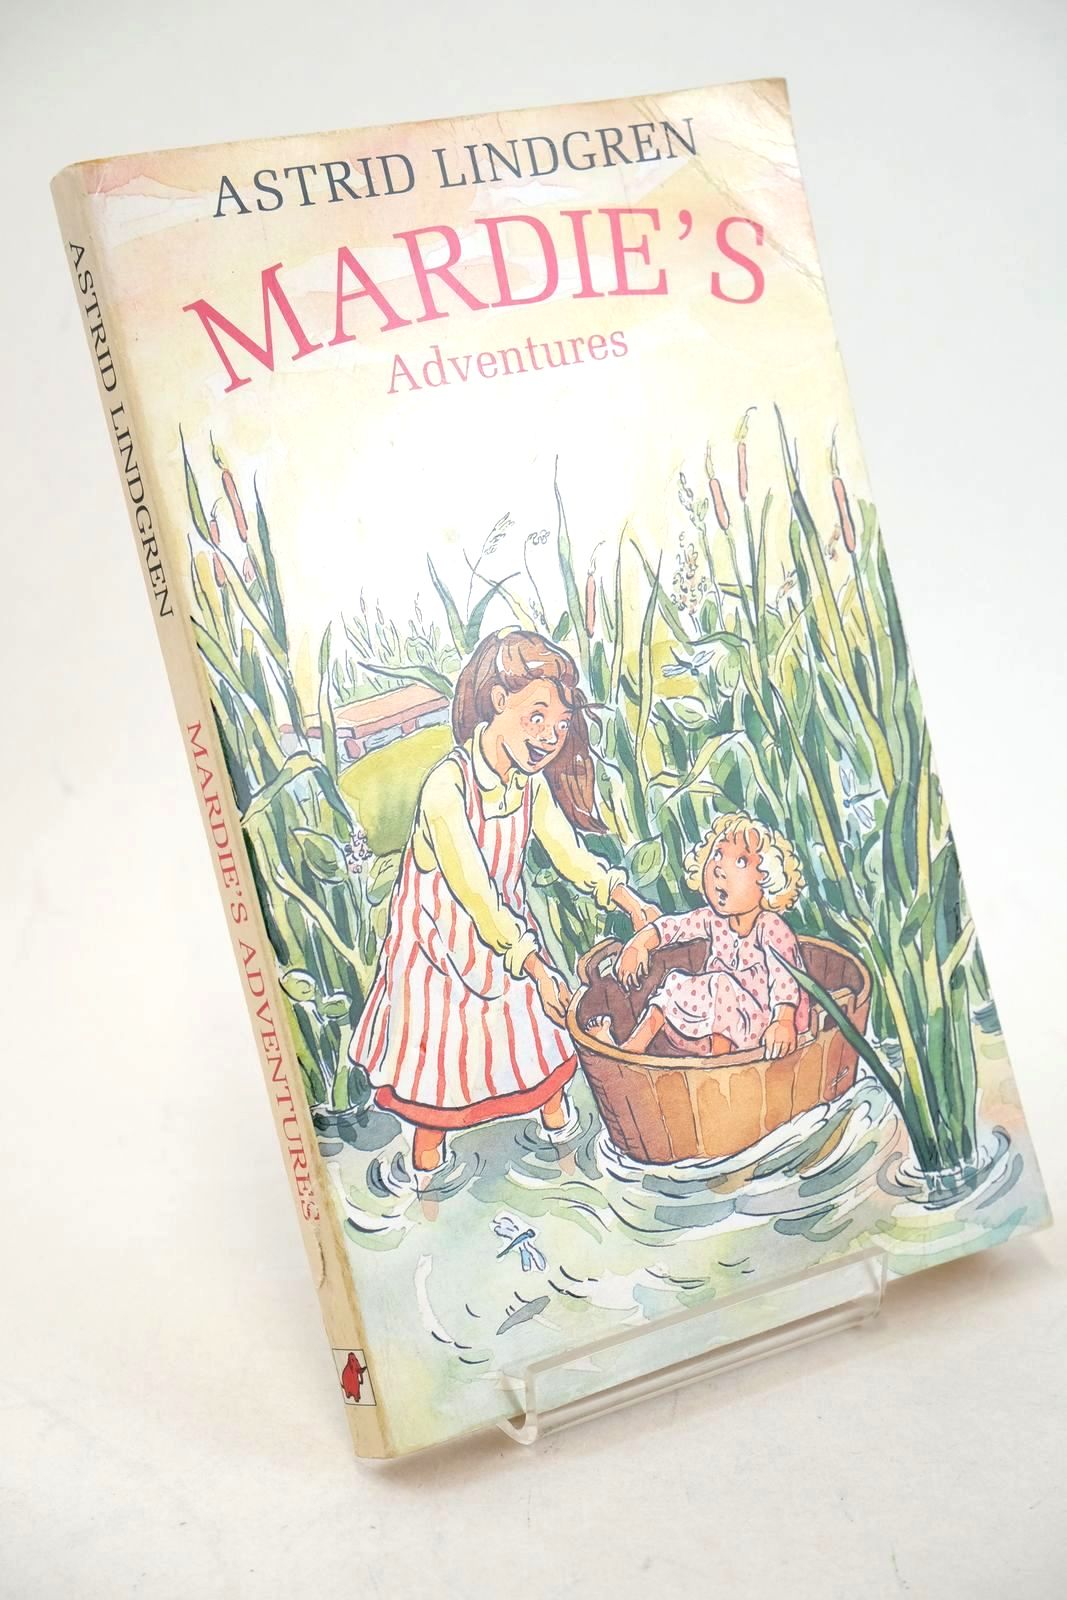 Photo of MARDIE'S ADVENTURES written by Lindgren, Astrid Crampton, Patricia illustrated by Wikland, Ilon published by Mammoth (STOCK CODE: 1327089)  for sale by Stella & Rose's Books